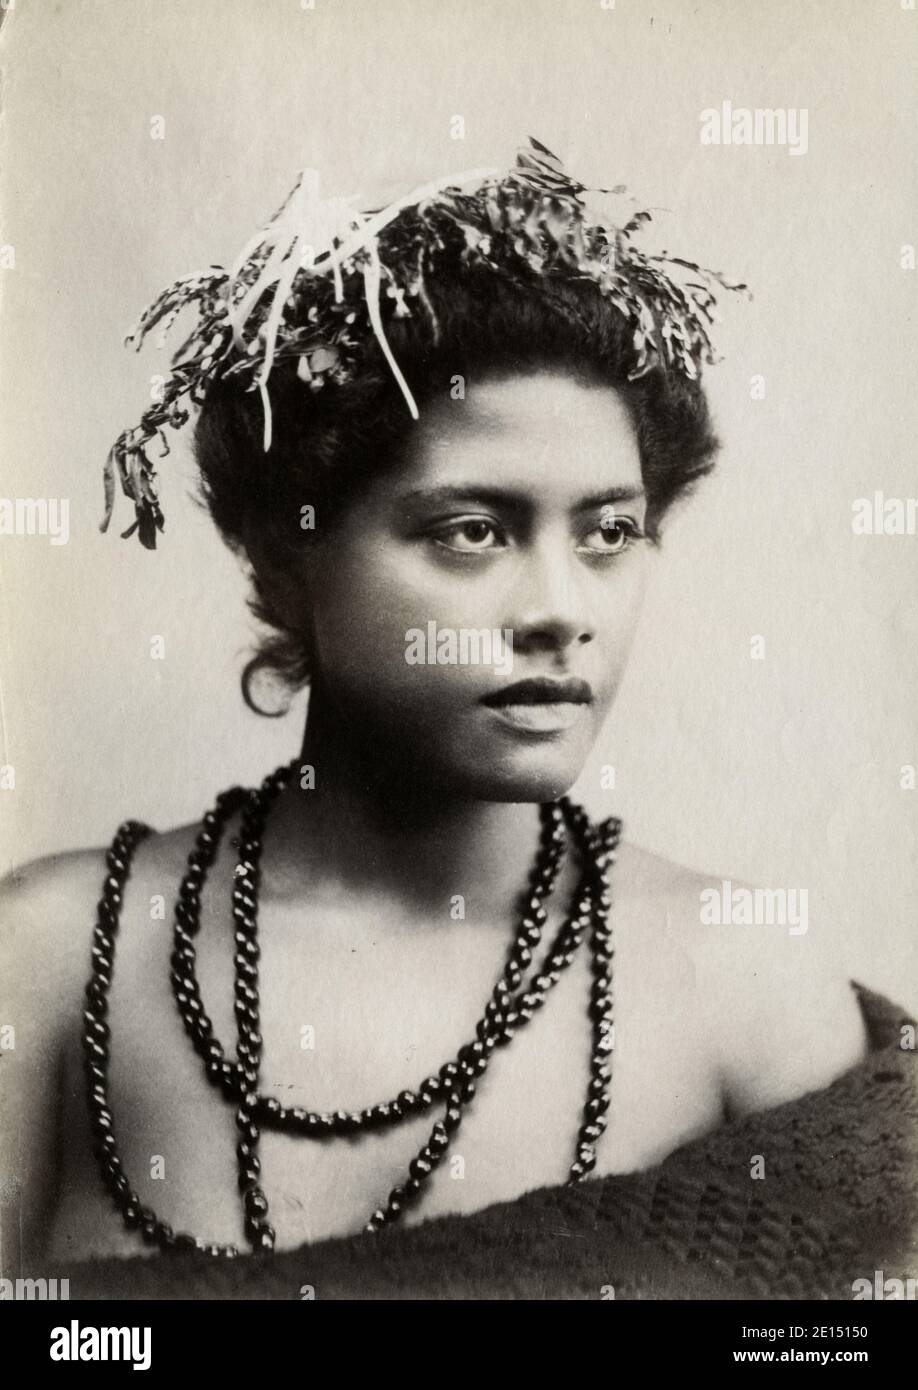 Vintage Th Century Photograph Oceania Pacific Islands Probably